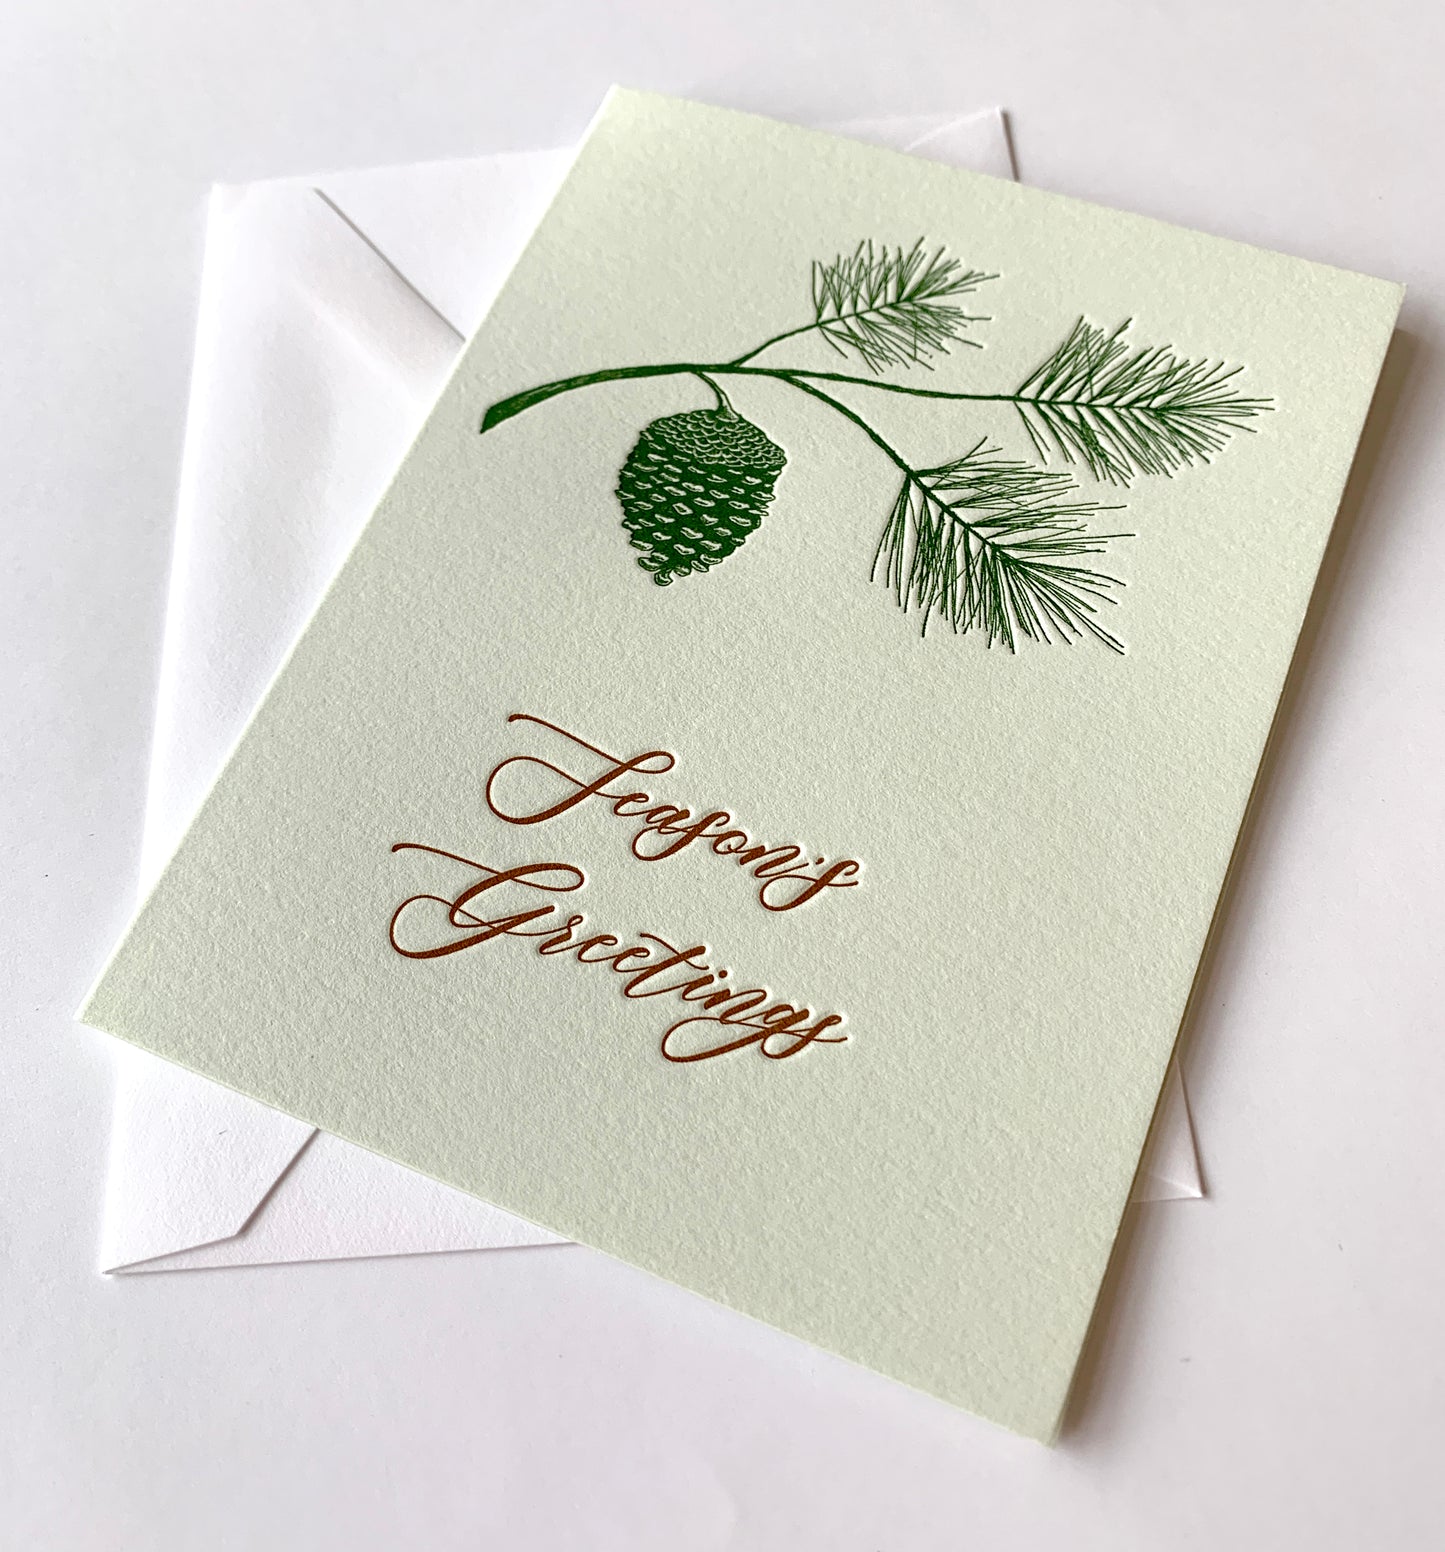 Letterpress holiday card with pinecone that says "Season's greetings" by Rust Belt Love